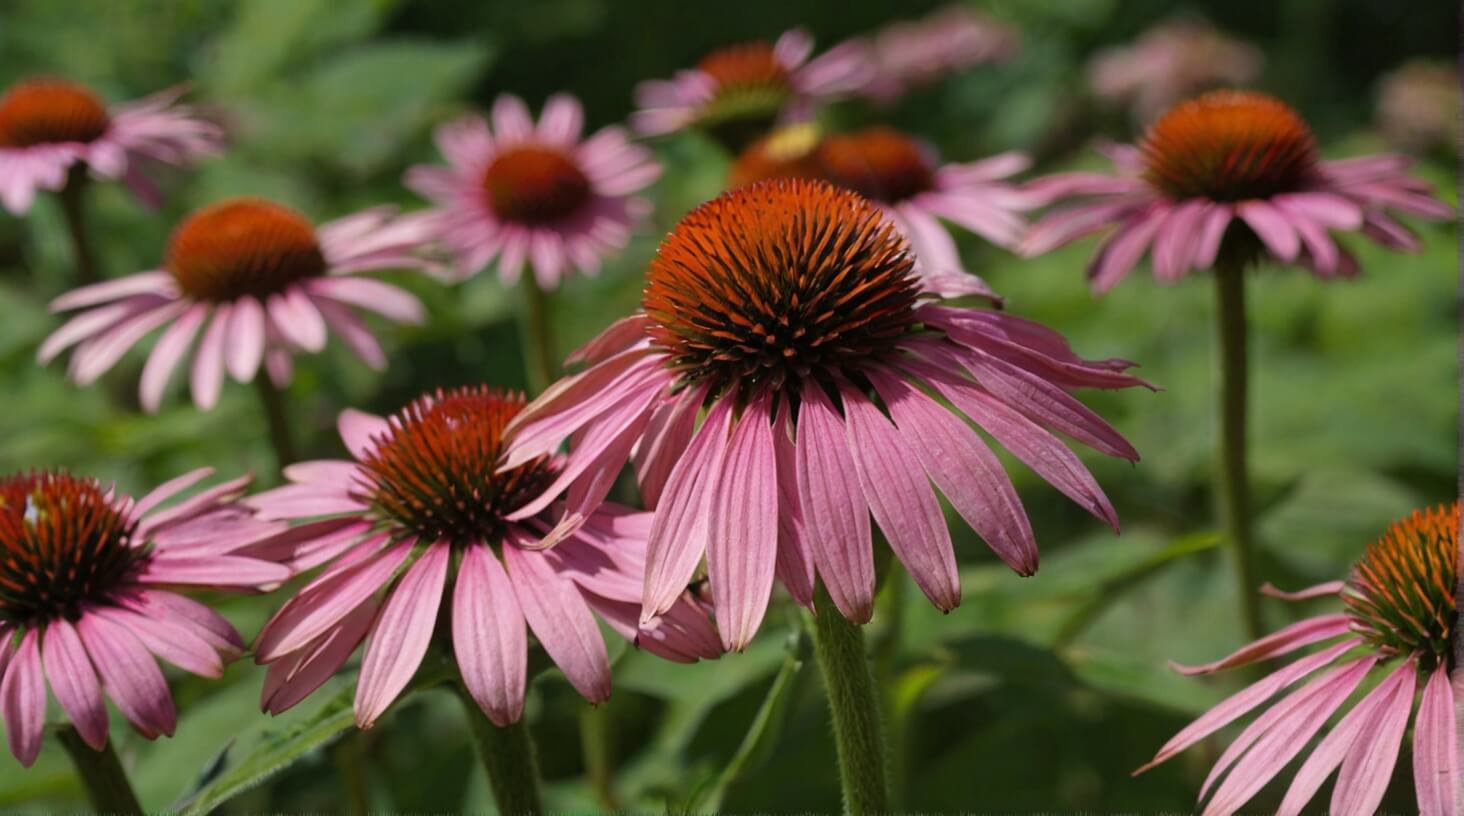 Close-up of vibrant Echinacea flowers, known for their immune-boosting properties, ideal for promoting overall wellness and immunity.